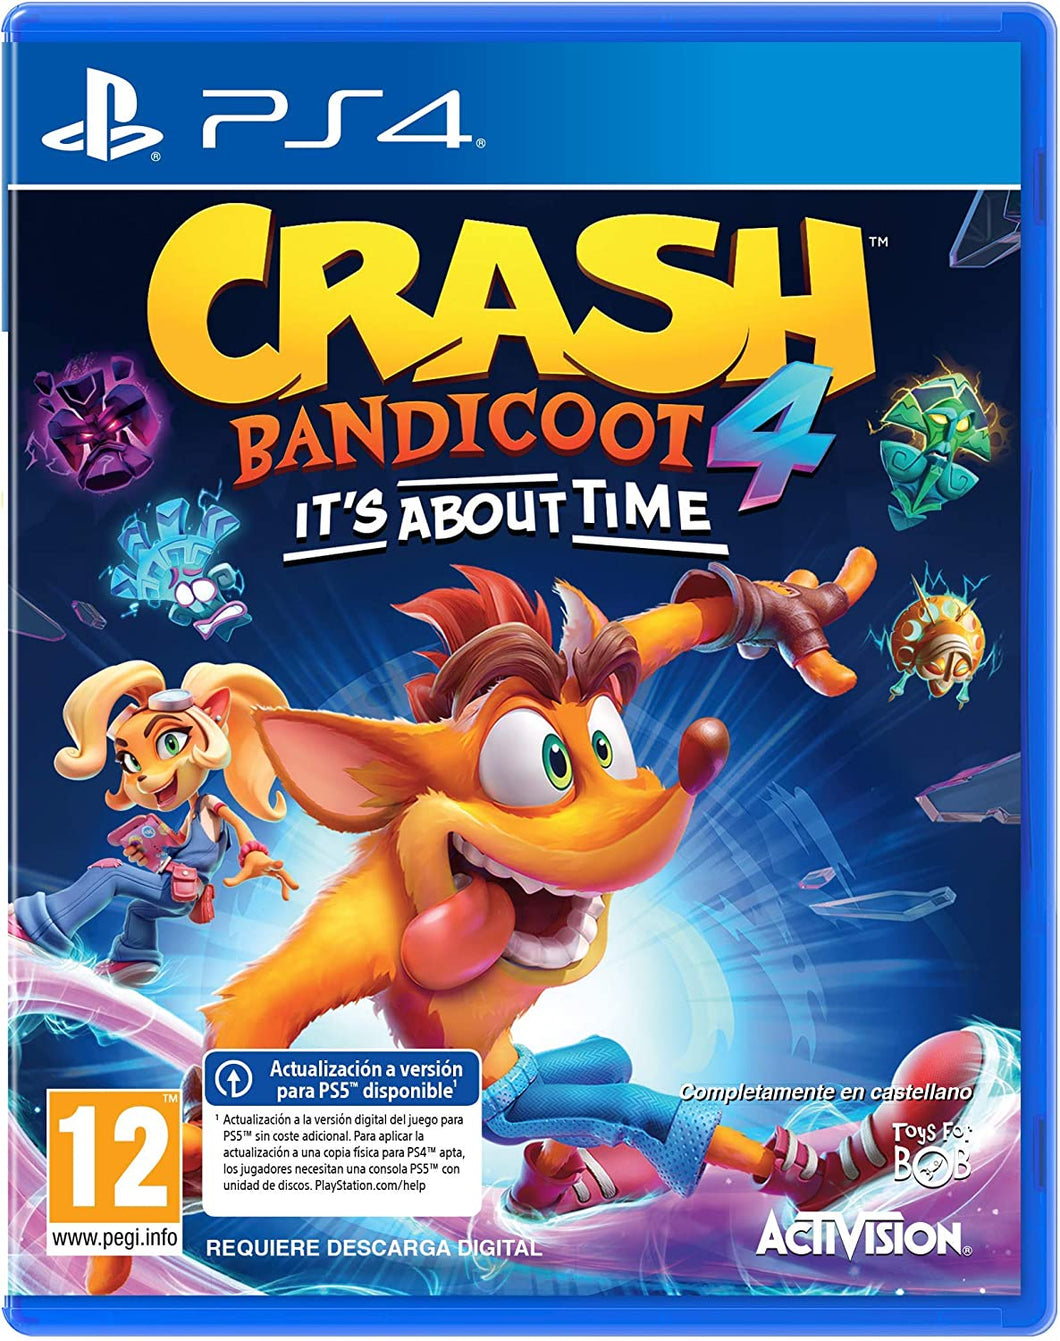 SONY PS4 GAME CRASH BANDICOOT 4 IT'S ABOUT TIME